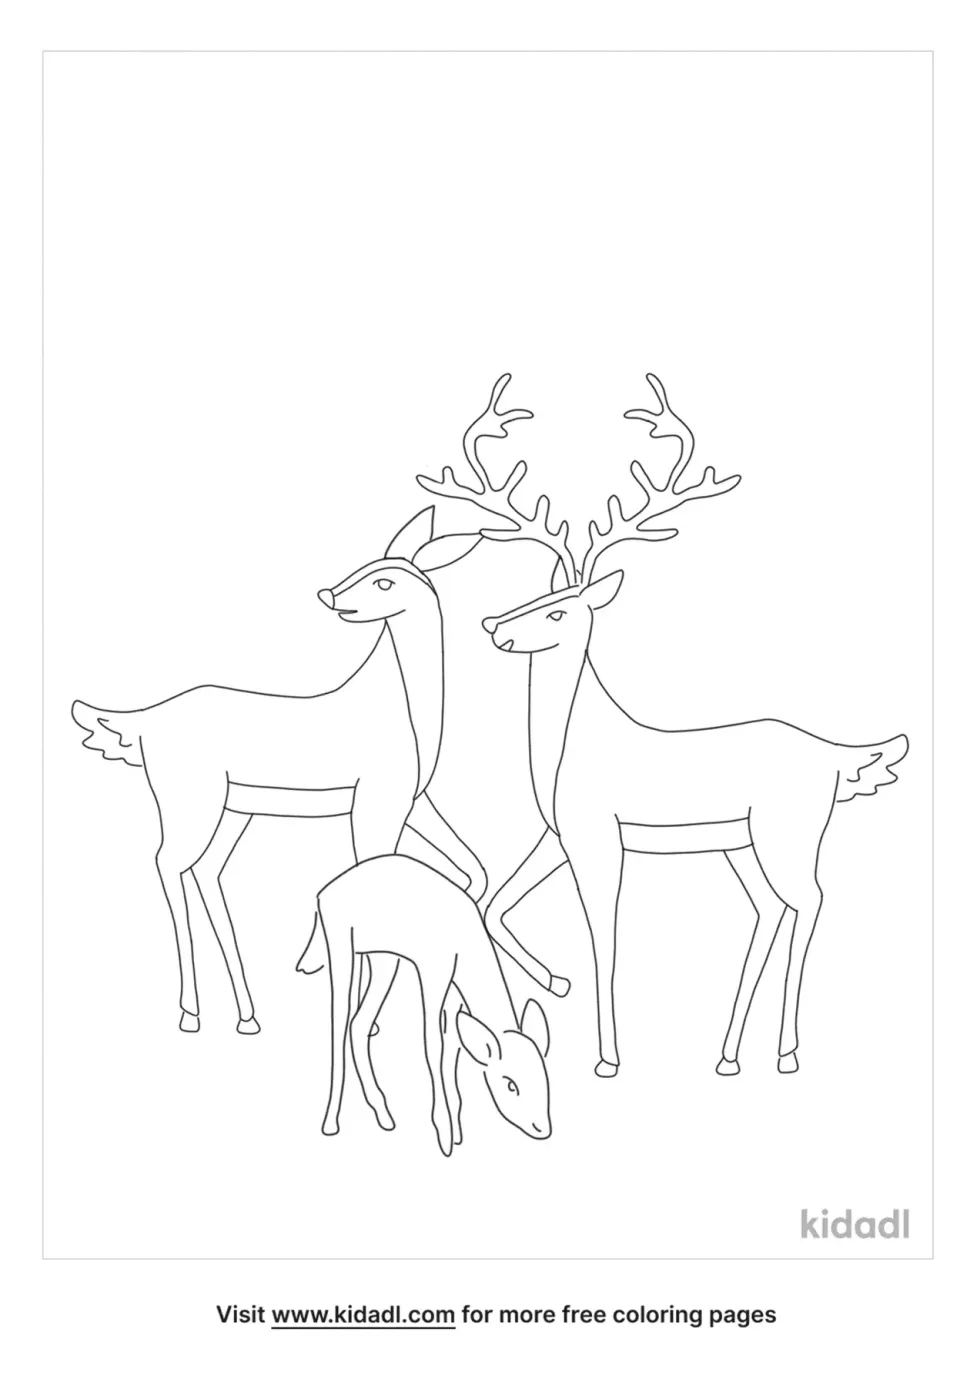 Reindeer Family Coloring Page